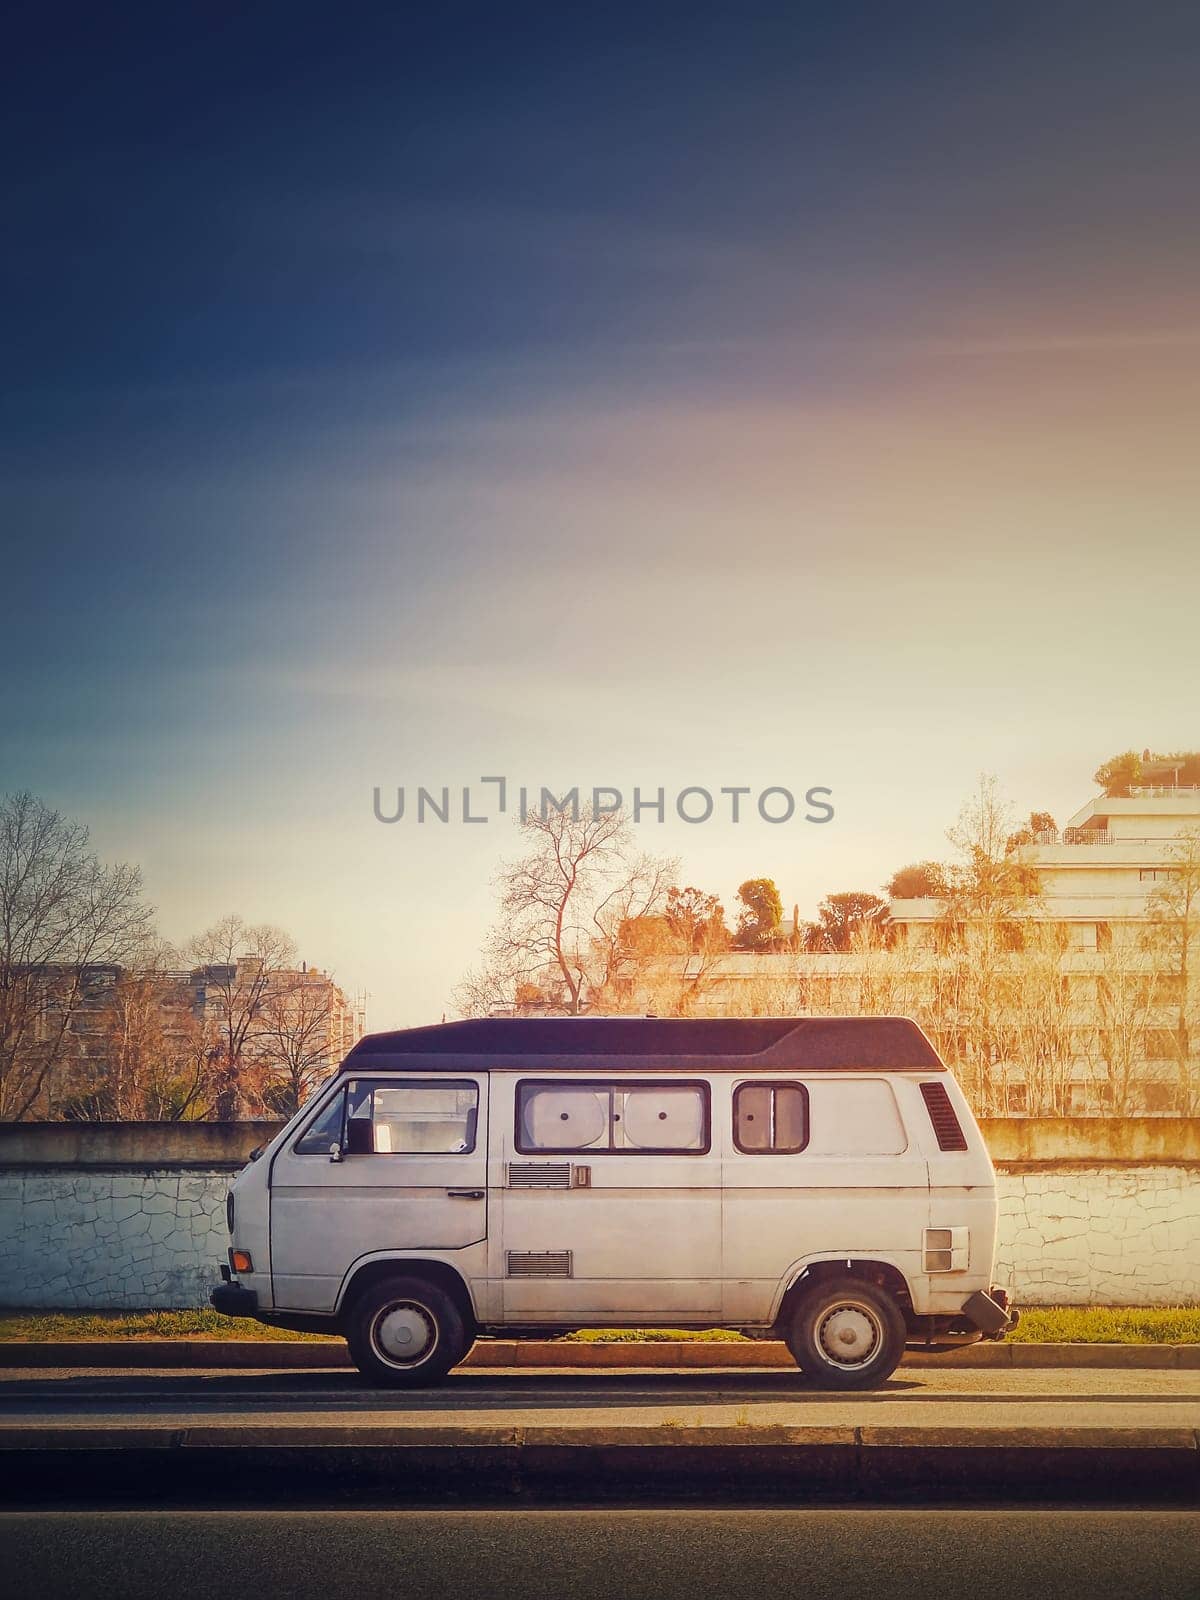 Old van parked on the edge of the street in the sunset sky background, Asnieres sur Seine, Paris suburb, France by psychoshadow